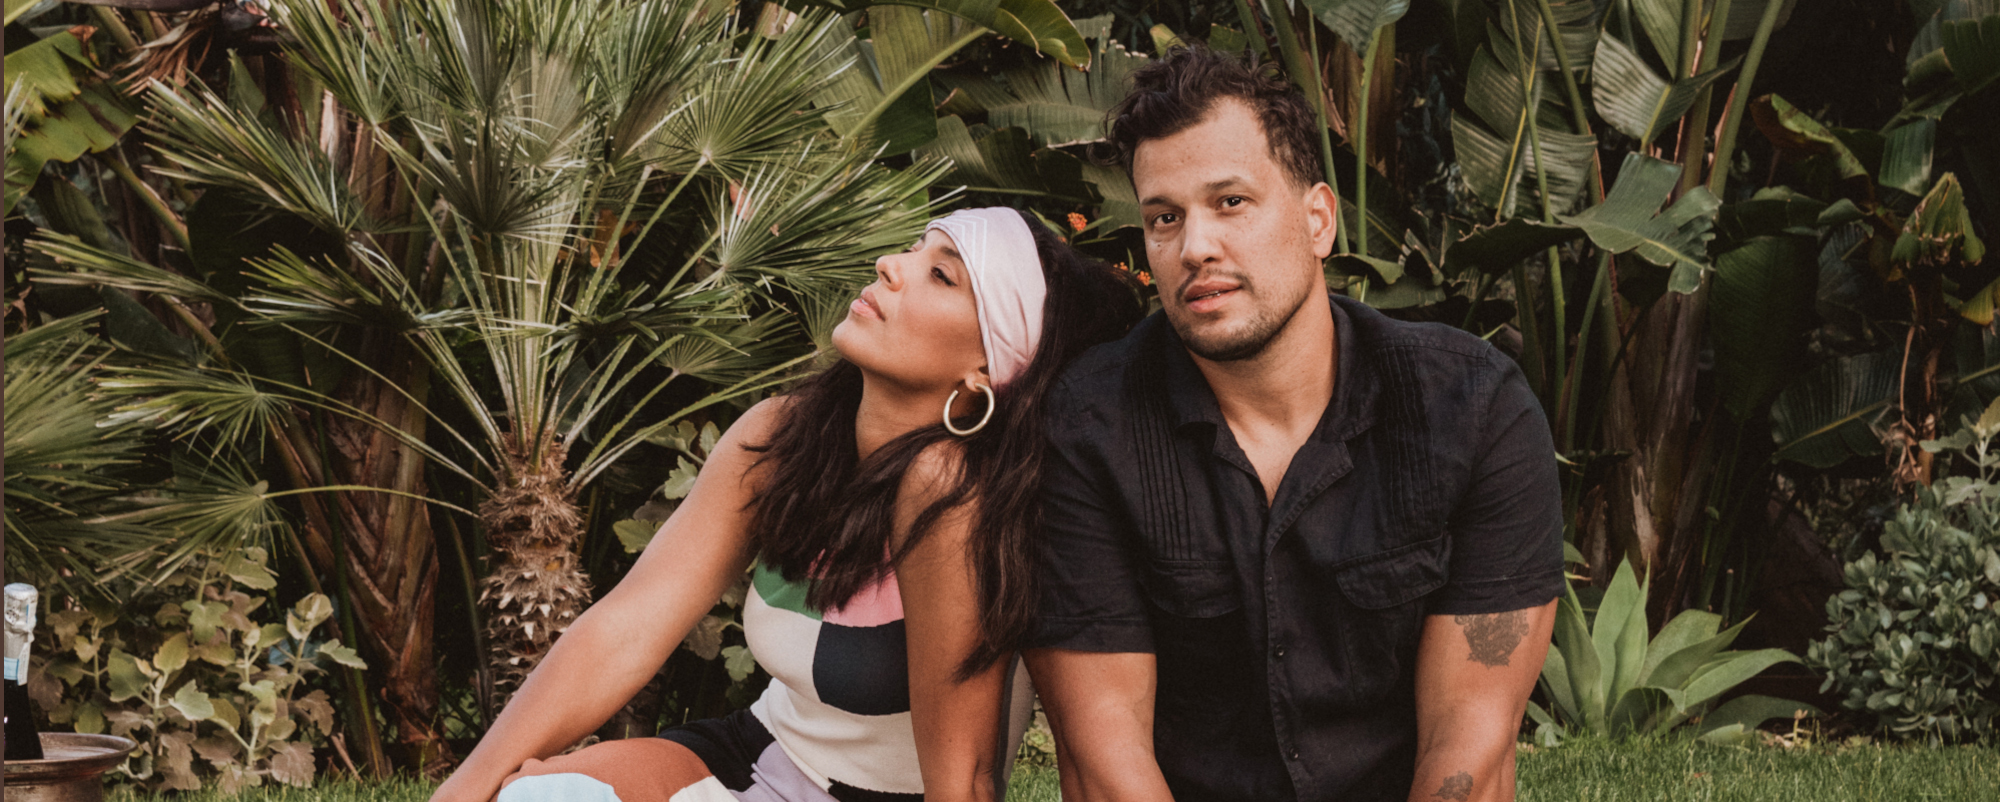 Johnnyswim Keeps it All in the Family on Standout Self-Titled Album